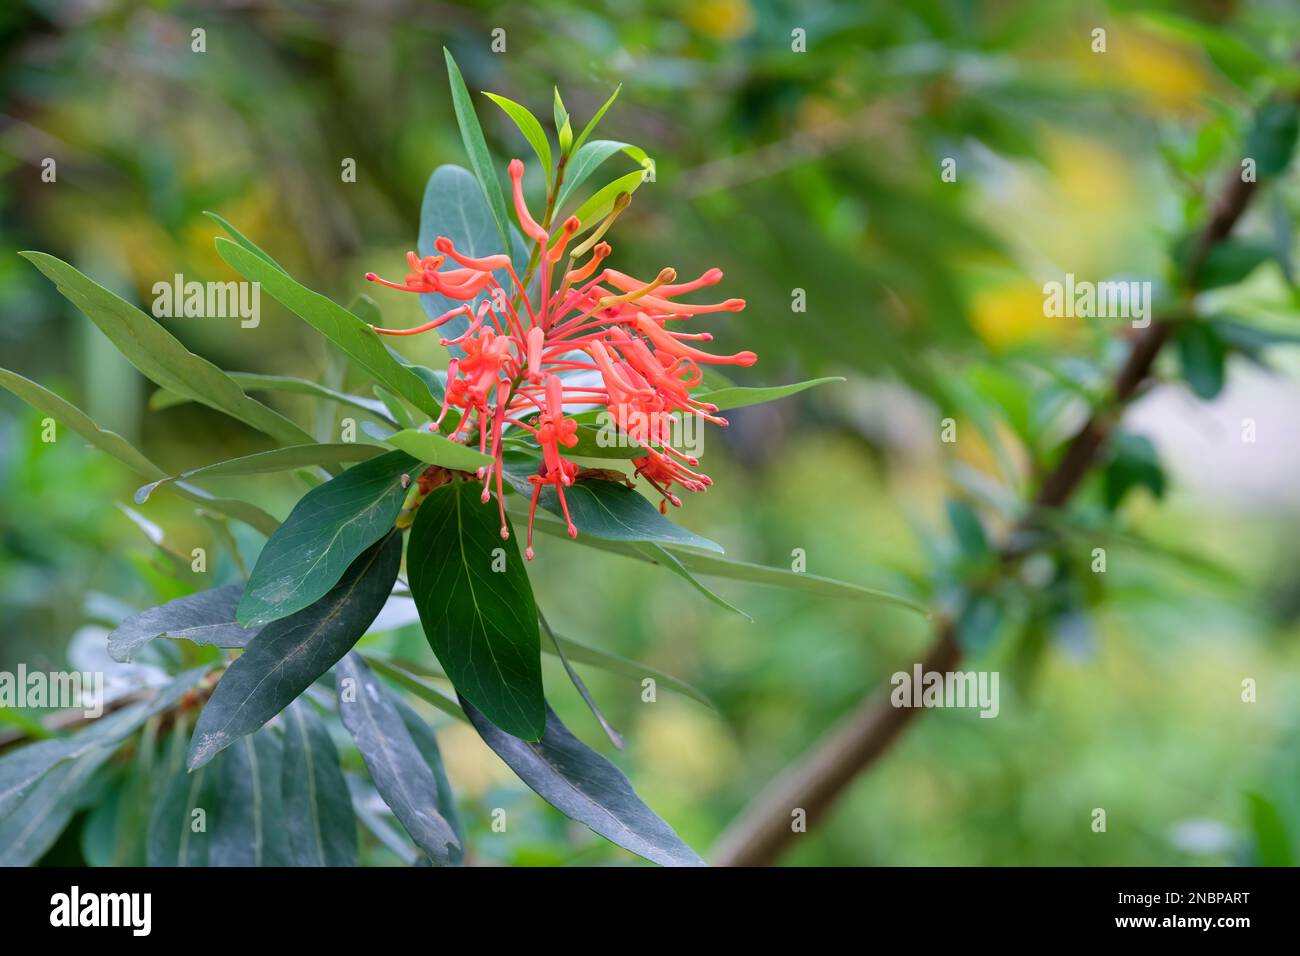 Embothrium coccineum, Chilean flame flower,  evergreen shrub, clusters of narrowly tubular scarlet flowers Stock Photo